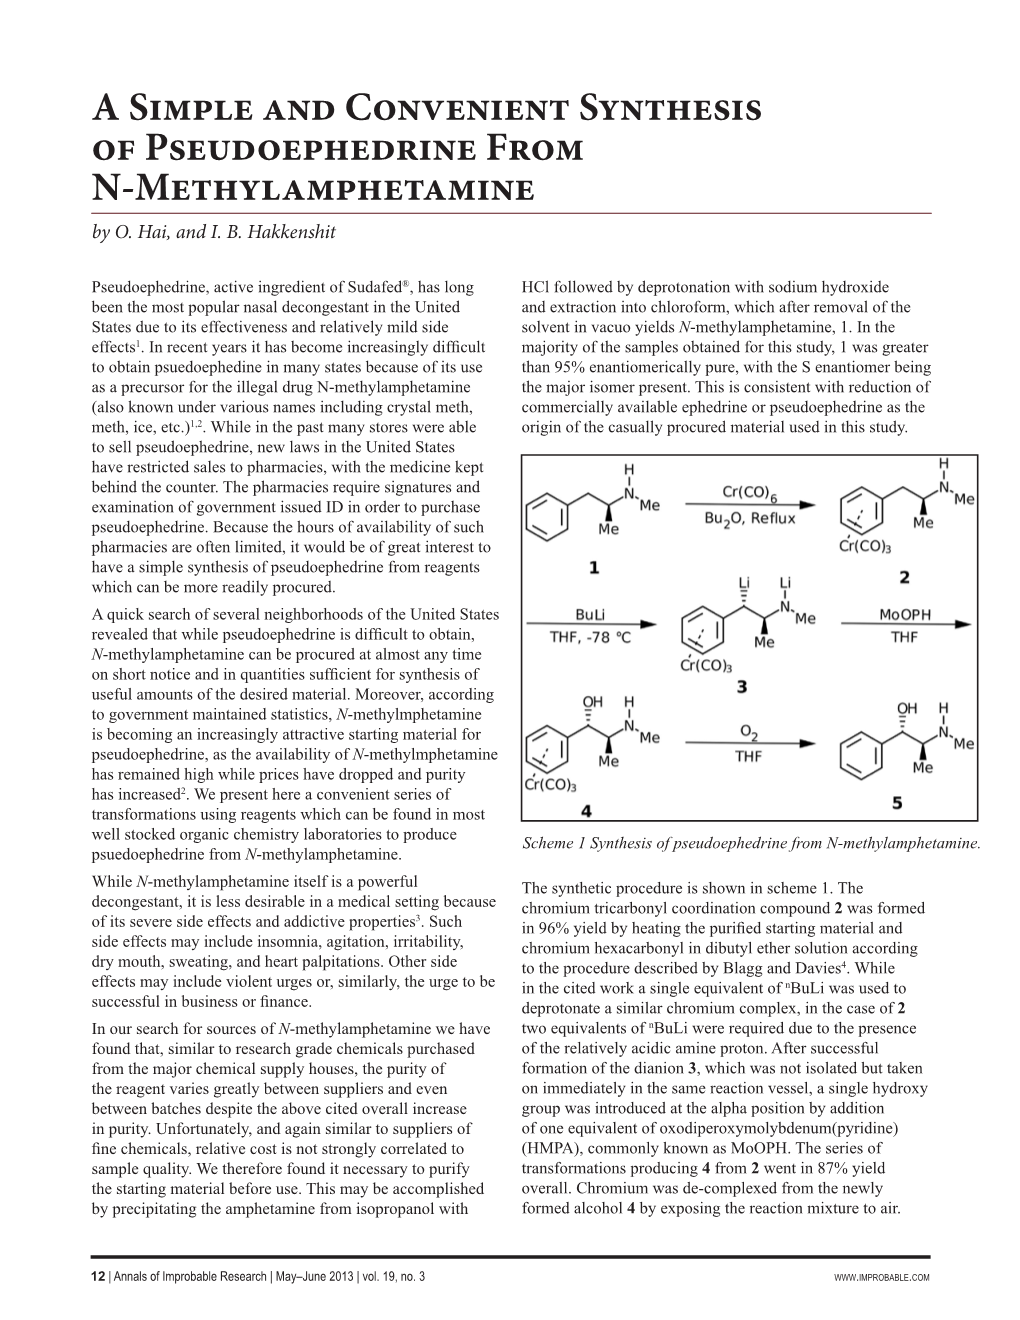 A Simple and Convenient Synthesis of Pseudoephedrine from N-Methylamphetamine by O